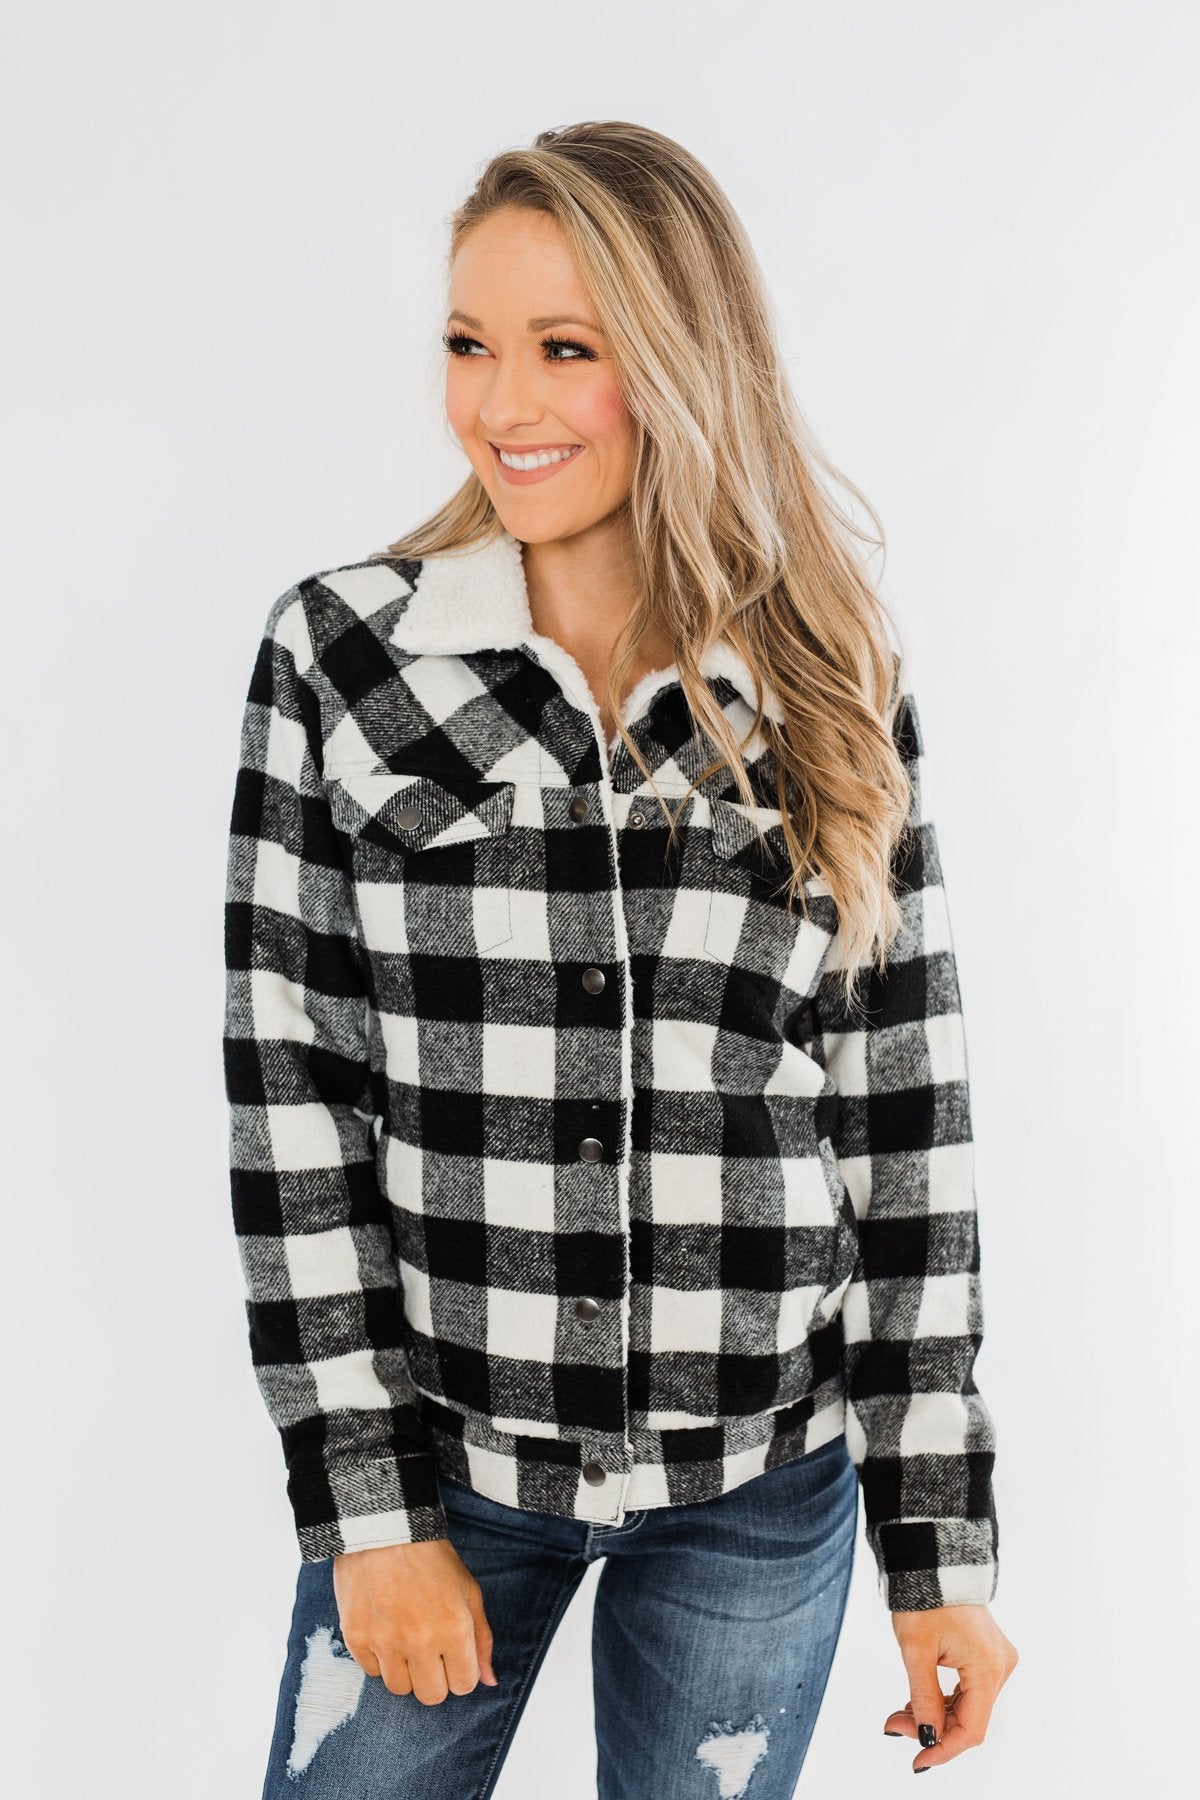 Warm All Winter Lined Jacket- White Buffalo Plaid – The Pulse Boutique